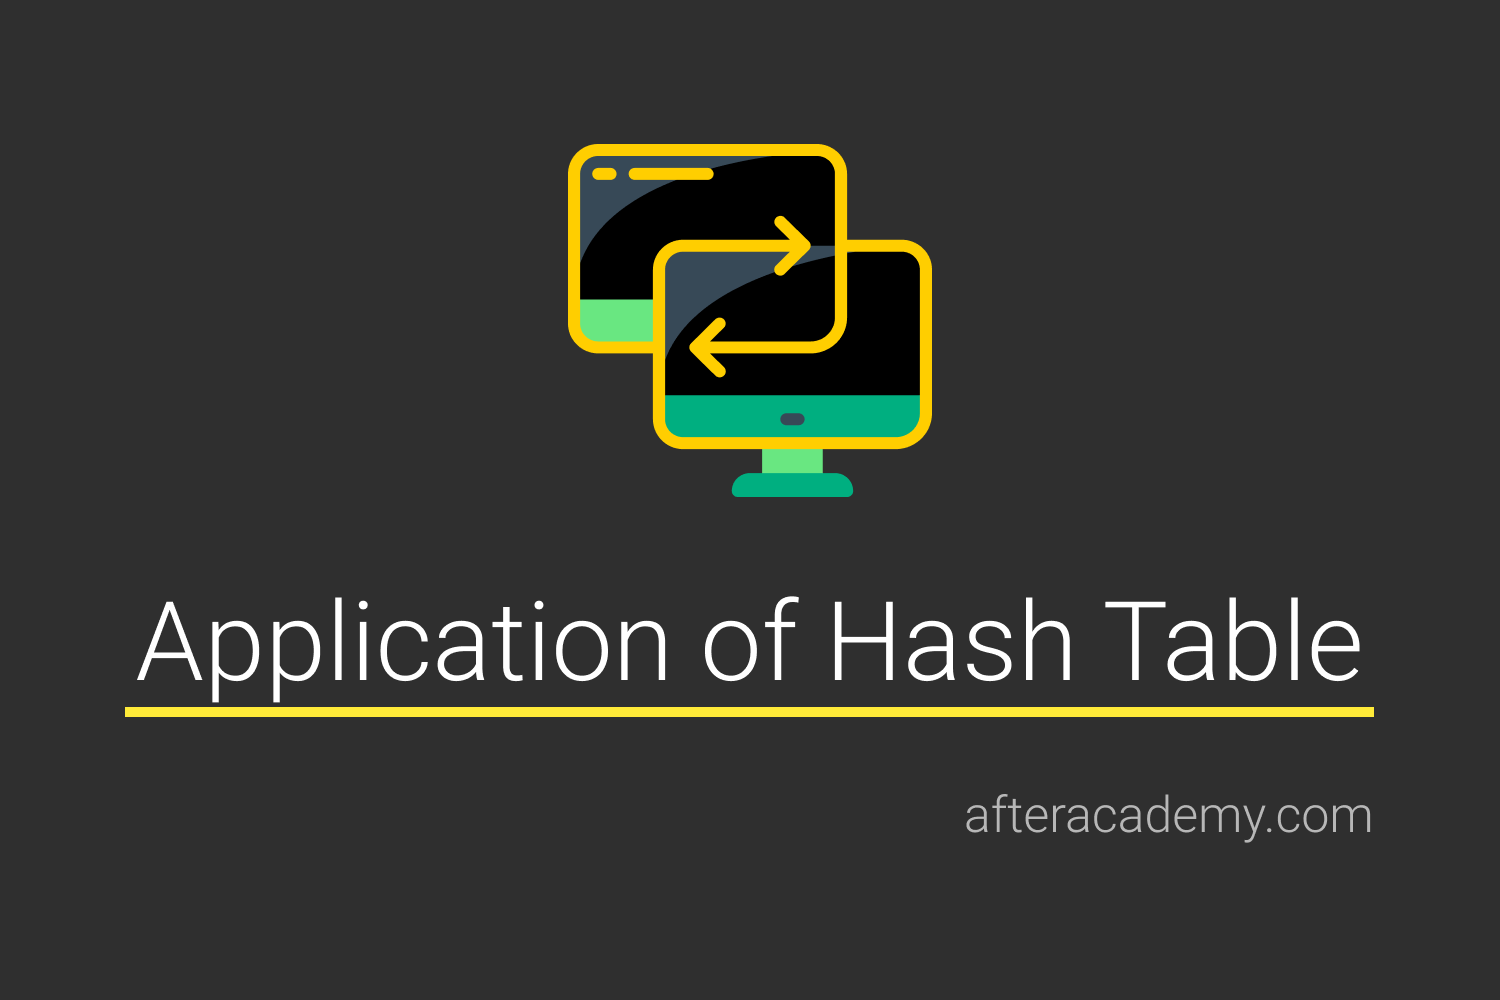 Applications of Hash Table